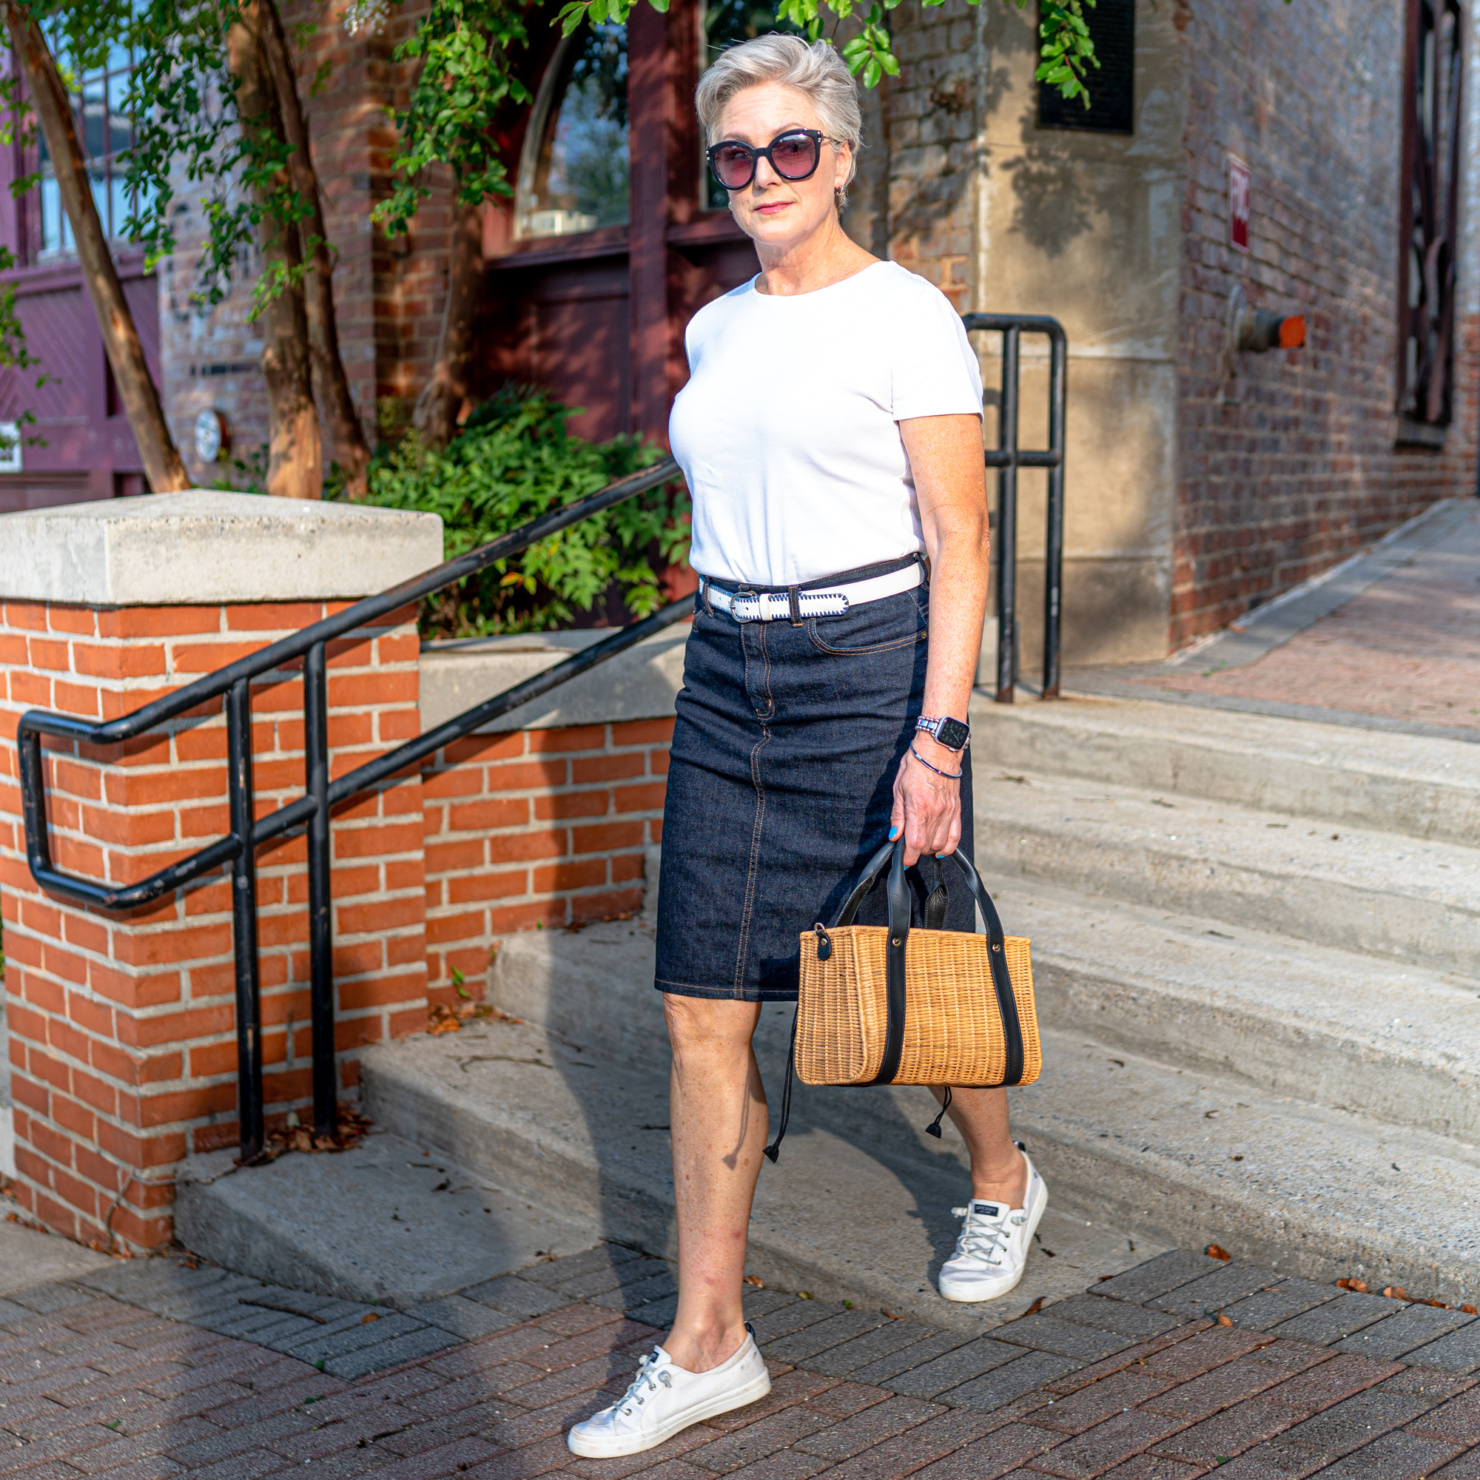 how to wear a skirt and tee - Style At A Certain Age